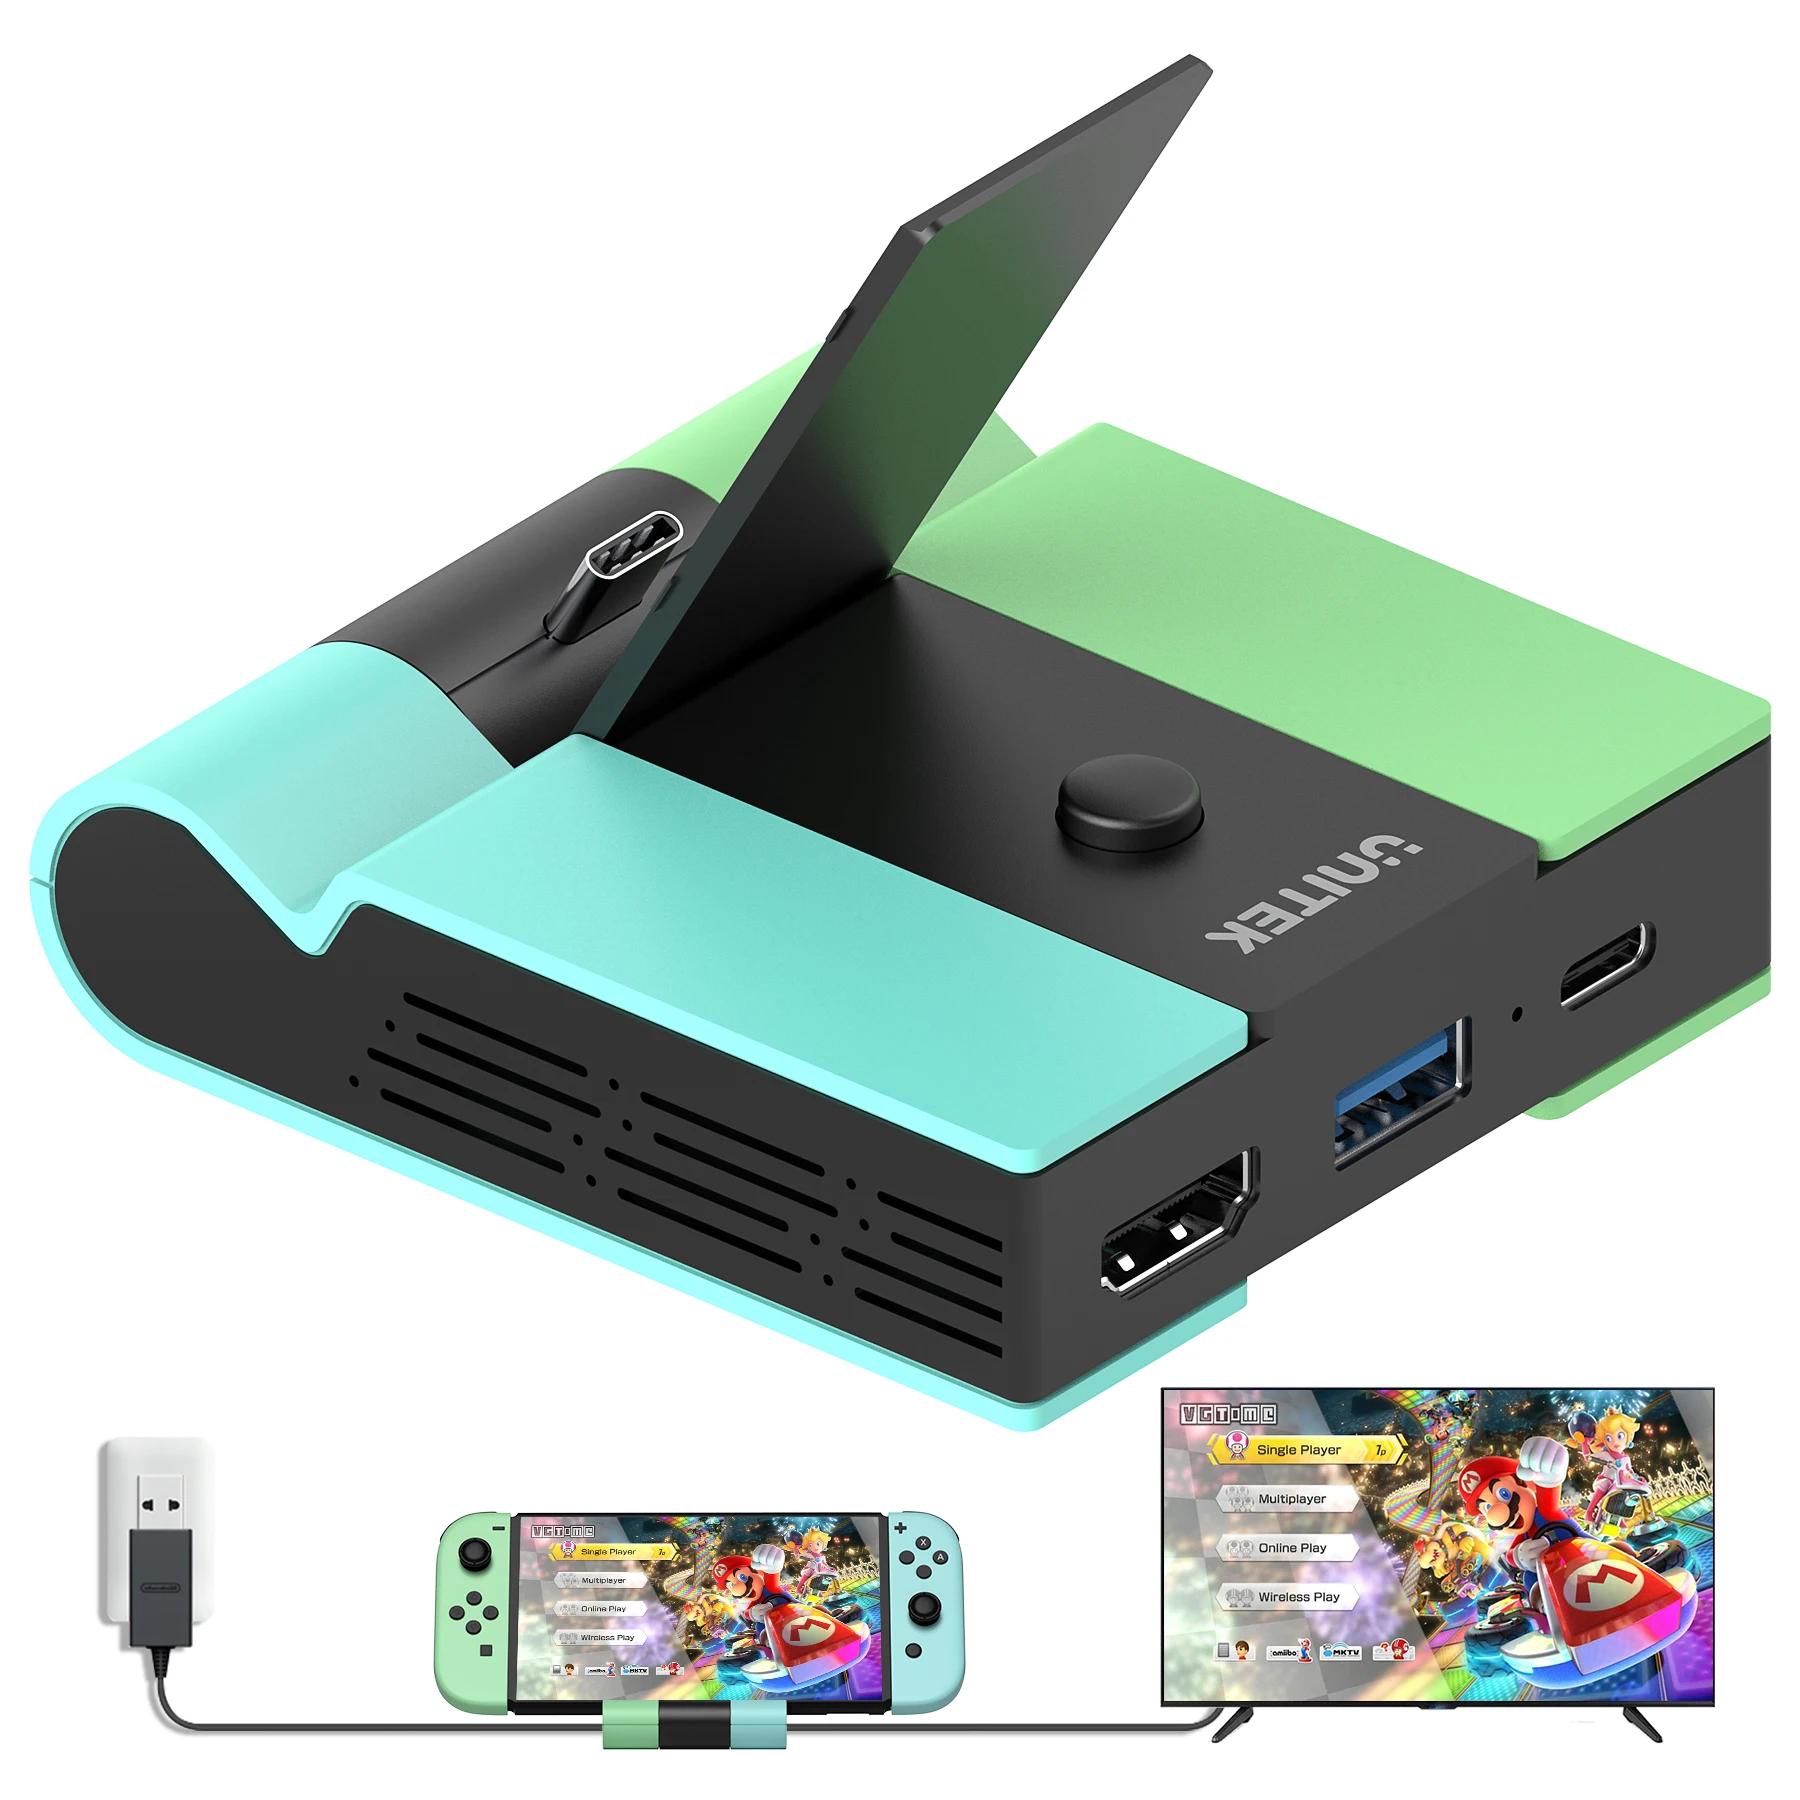 

Unitek Game Docking Station with 45W Type-C PD Charging 4K HDMI USB 3.0 for Nintendo Switch OLED Lite Gaming Dock HUB for TV